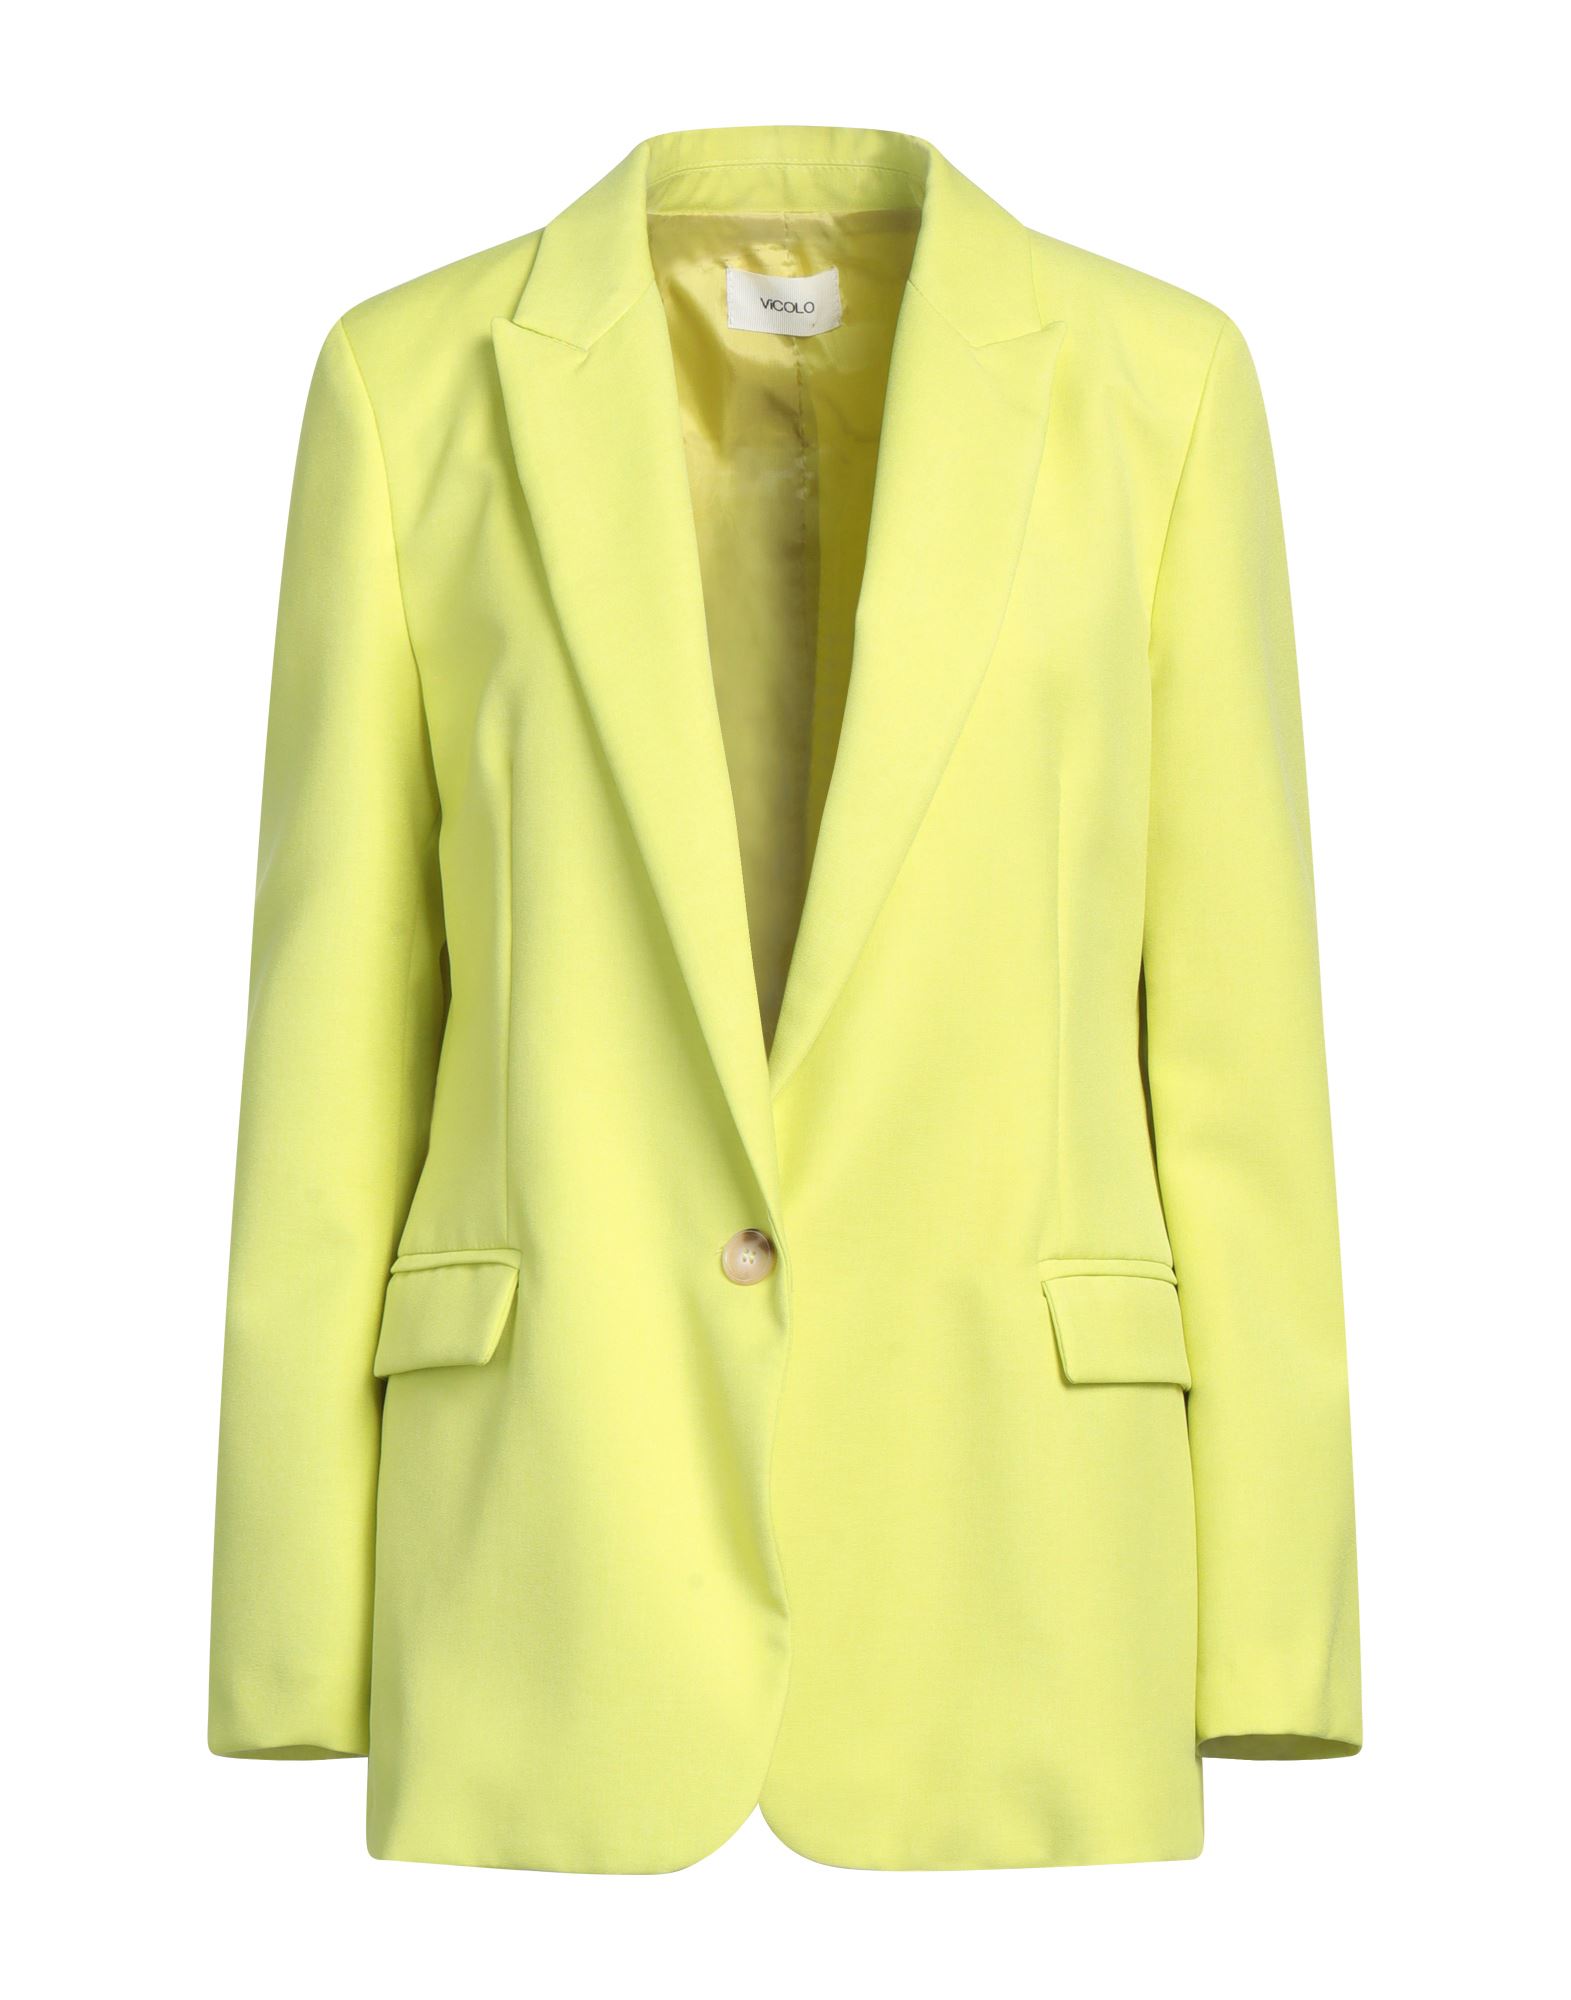 VICOLO VICOLO WOMAN SUIT JACKET ACID GREEN SIZE M POLYESTER